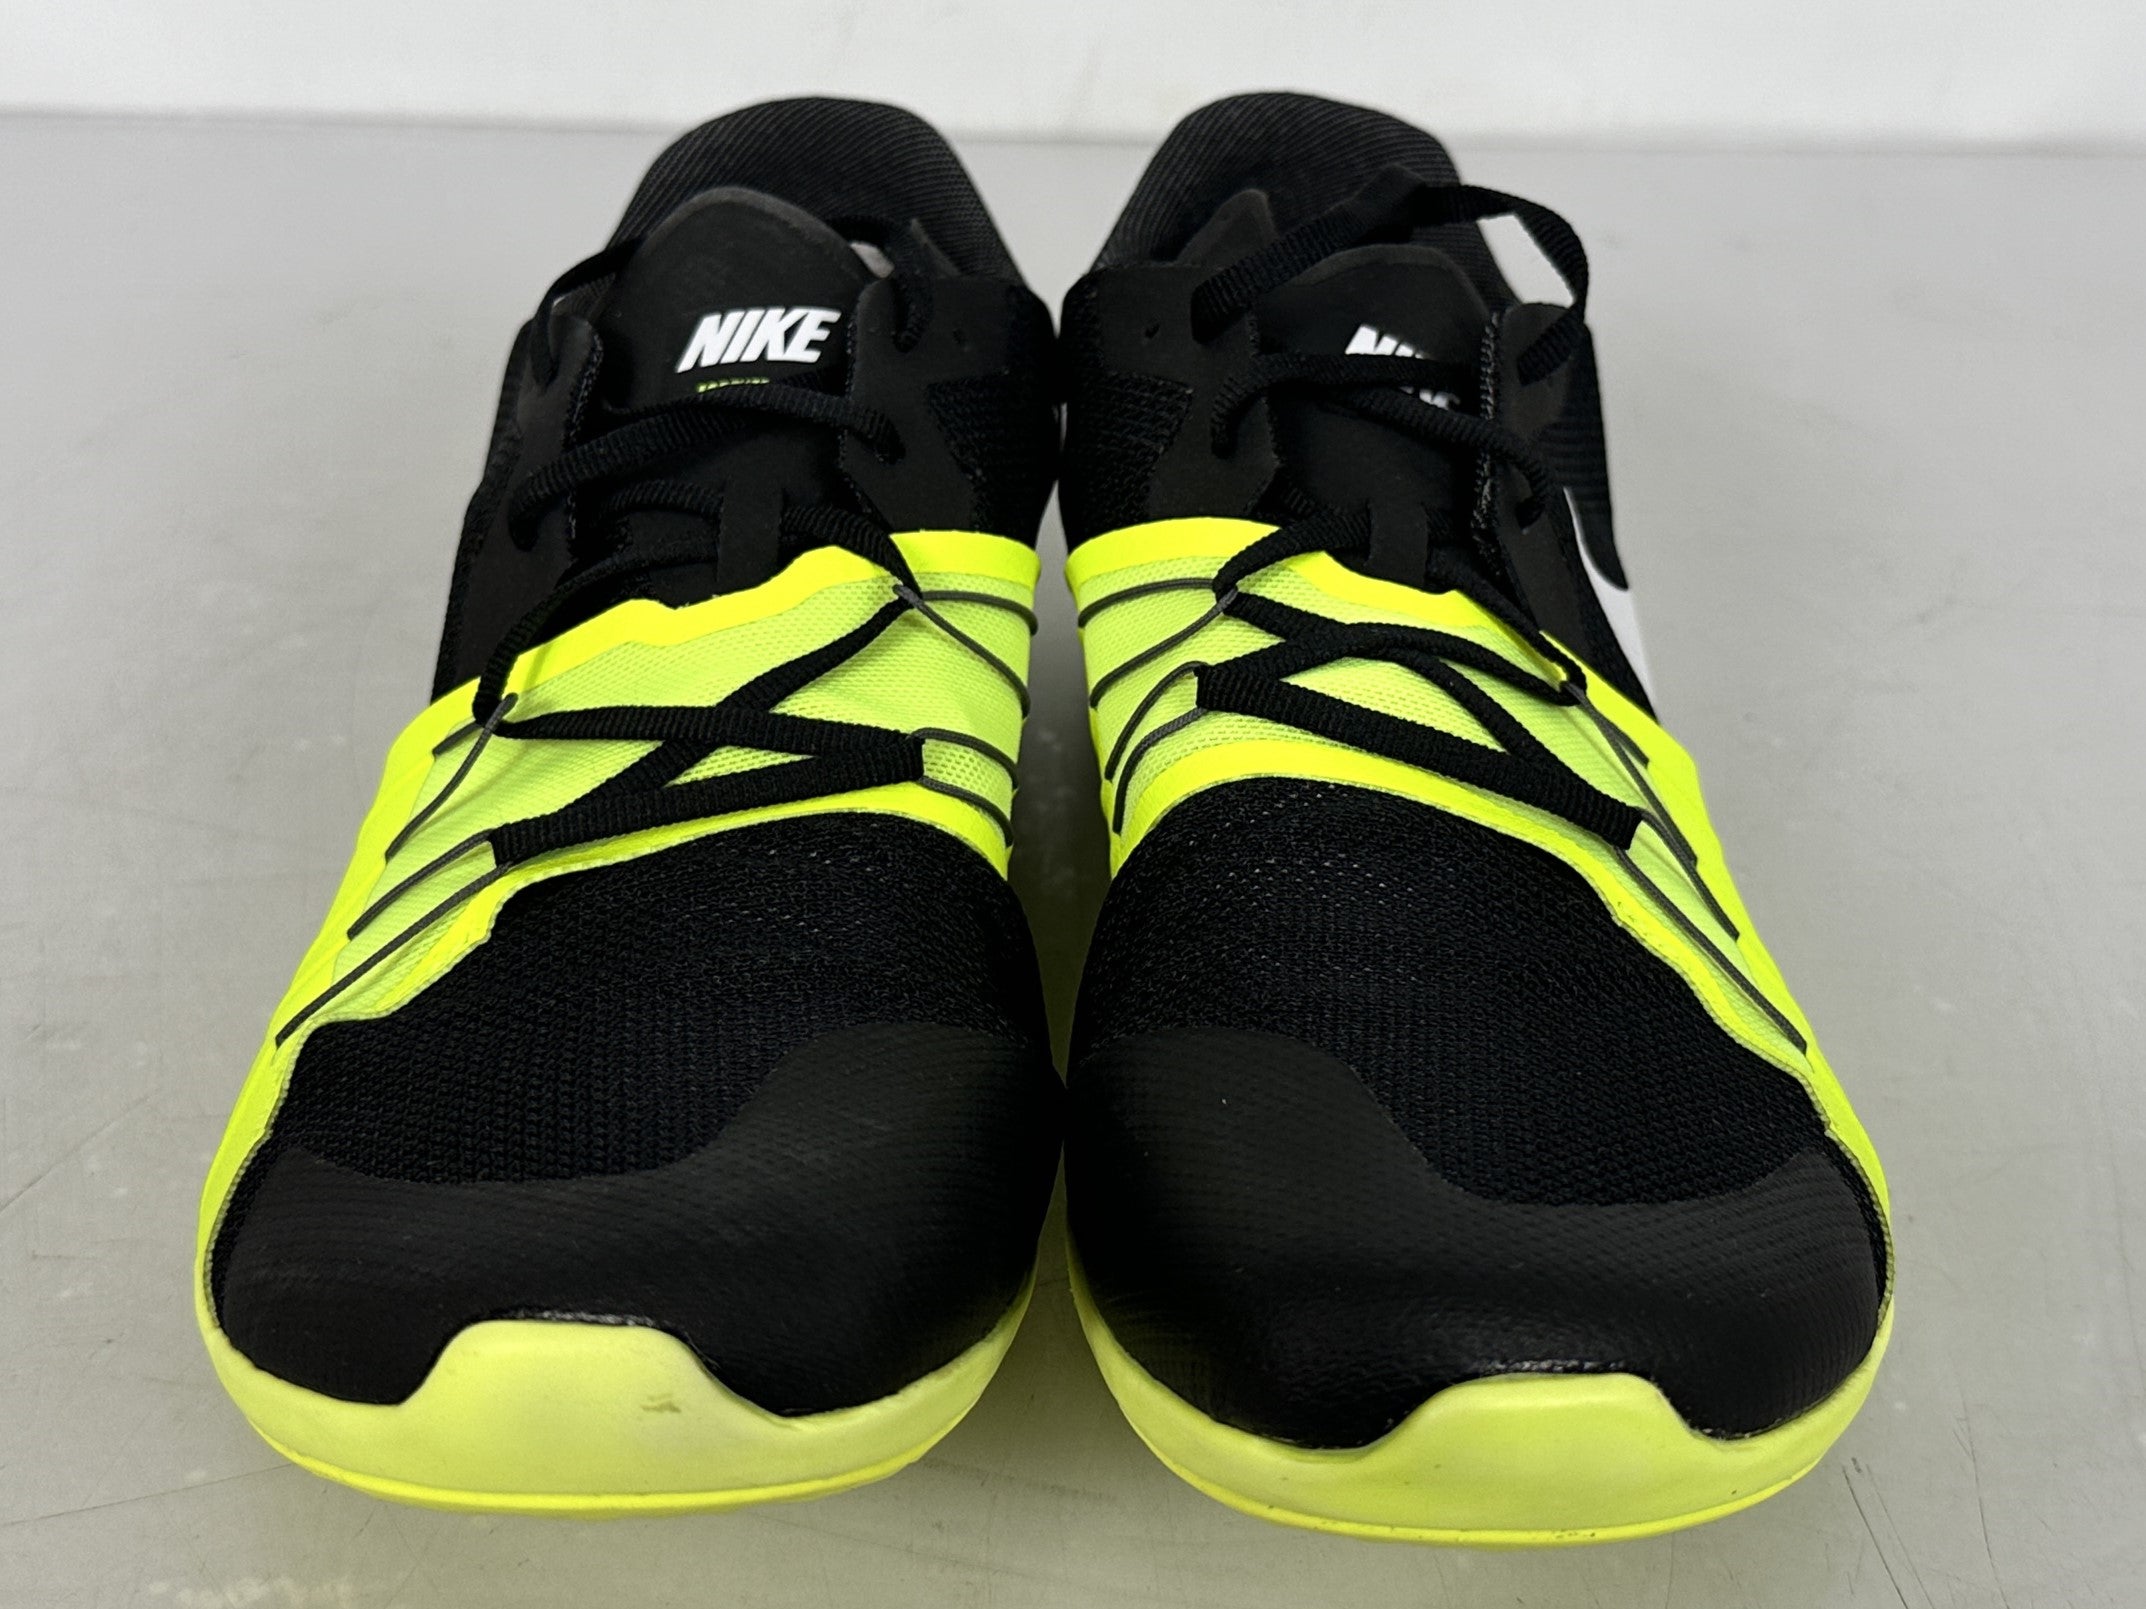 Nike Black & Volt Green Zoom Forever XC 5 Track & Field Spikes Men's Size 5